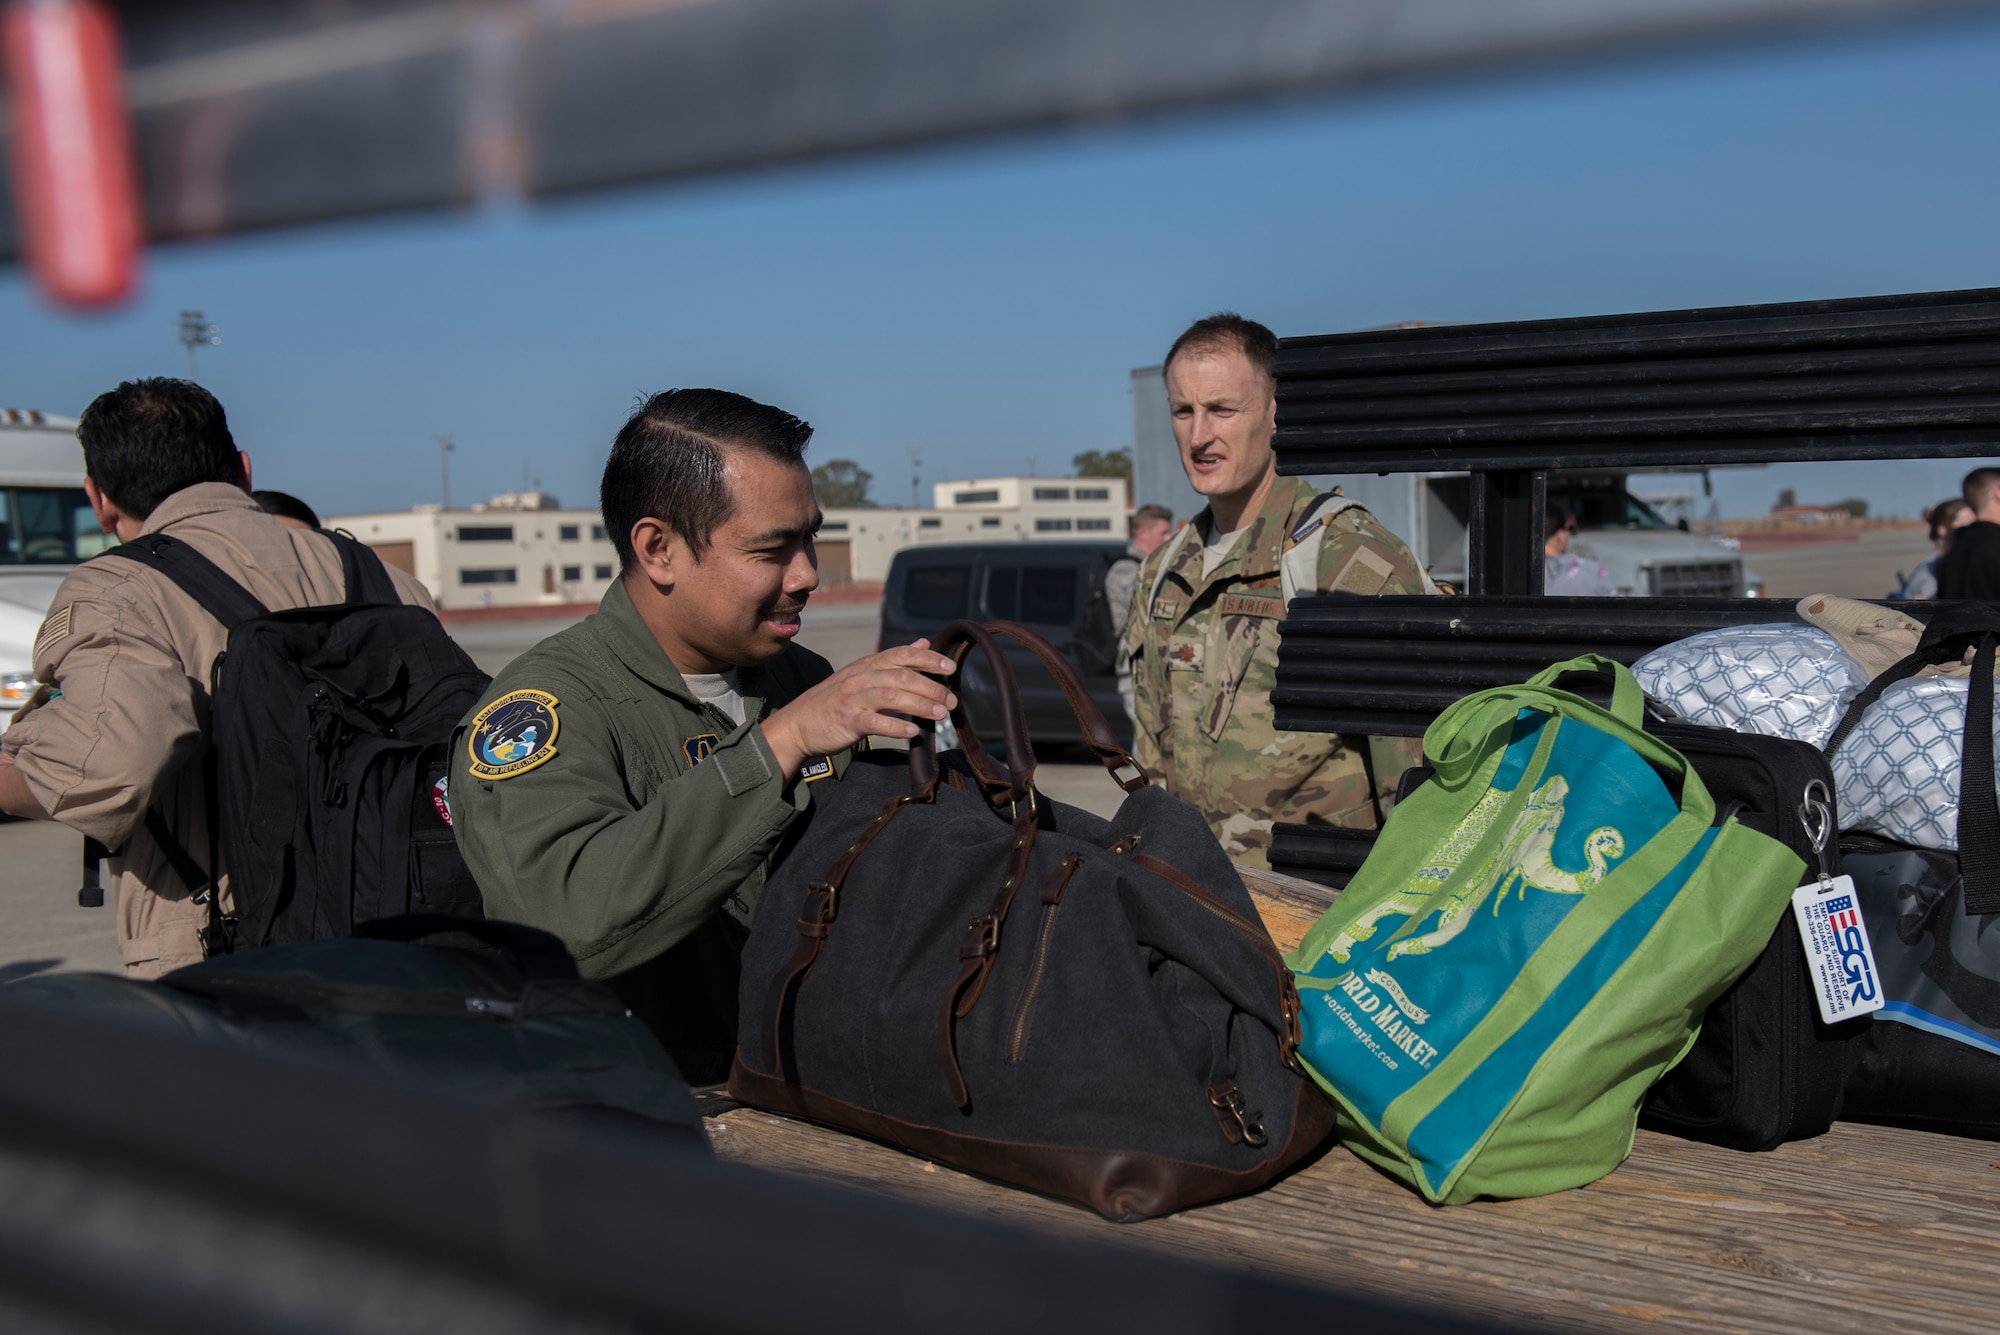 U.S. Air Force Master Sgt. Emmanuel Amigleo, 70th Air Refueling Squadron KC-10 Extender flight engineer, helps a KC-10 crew load their baggage after they return from their deployment Nov. 21, 2019, at Travis Air Force Base, California. The KC-10 crew returned to Travis AFB for the holidays after supporting operations in Southwest Asia for two months. (U.S. Air Force photo by Airman 1st Class Cameron Otte)